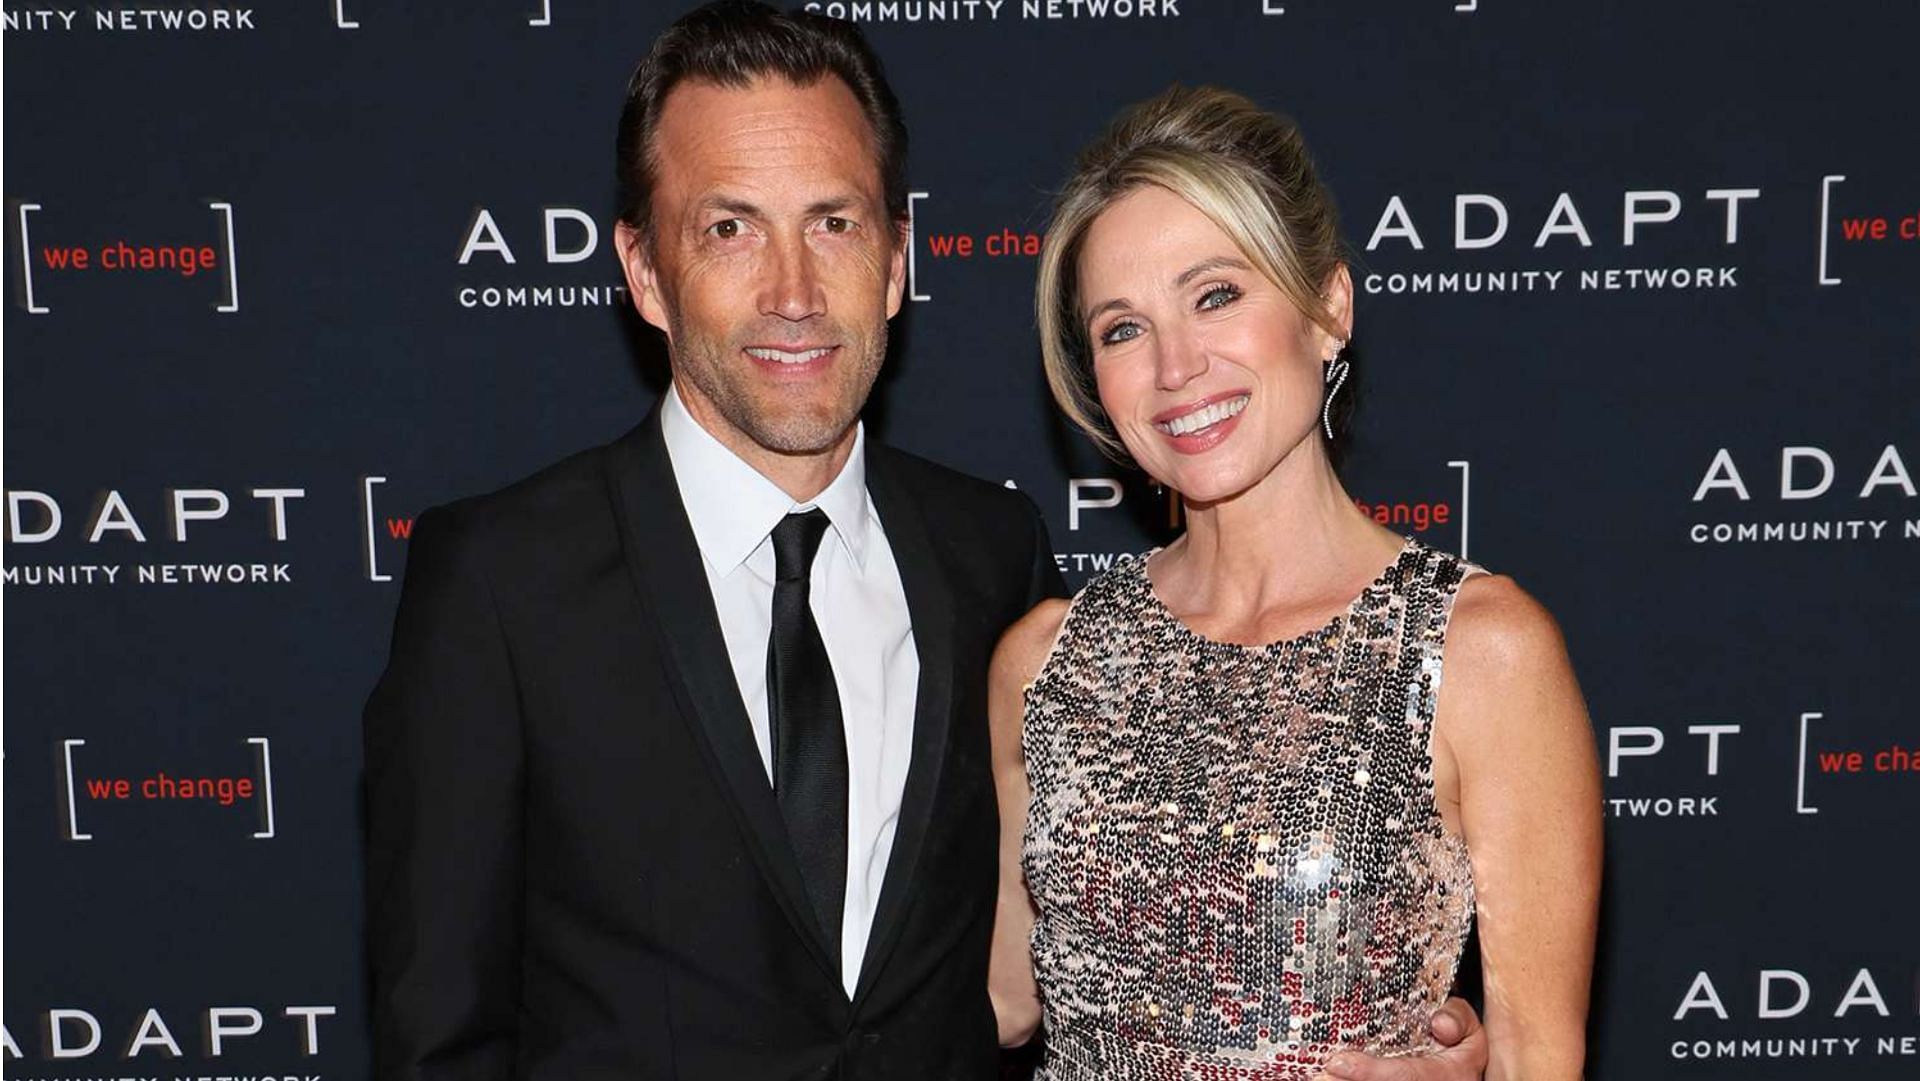 Andrew Shue has deleted pictures of Amy Robach from his Instagram handle. (Image via Mike Coppola/Getty)